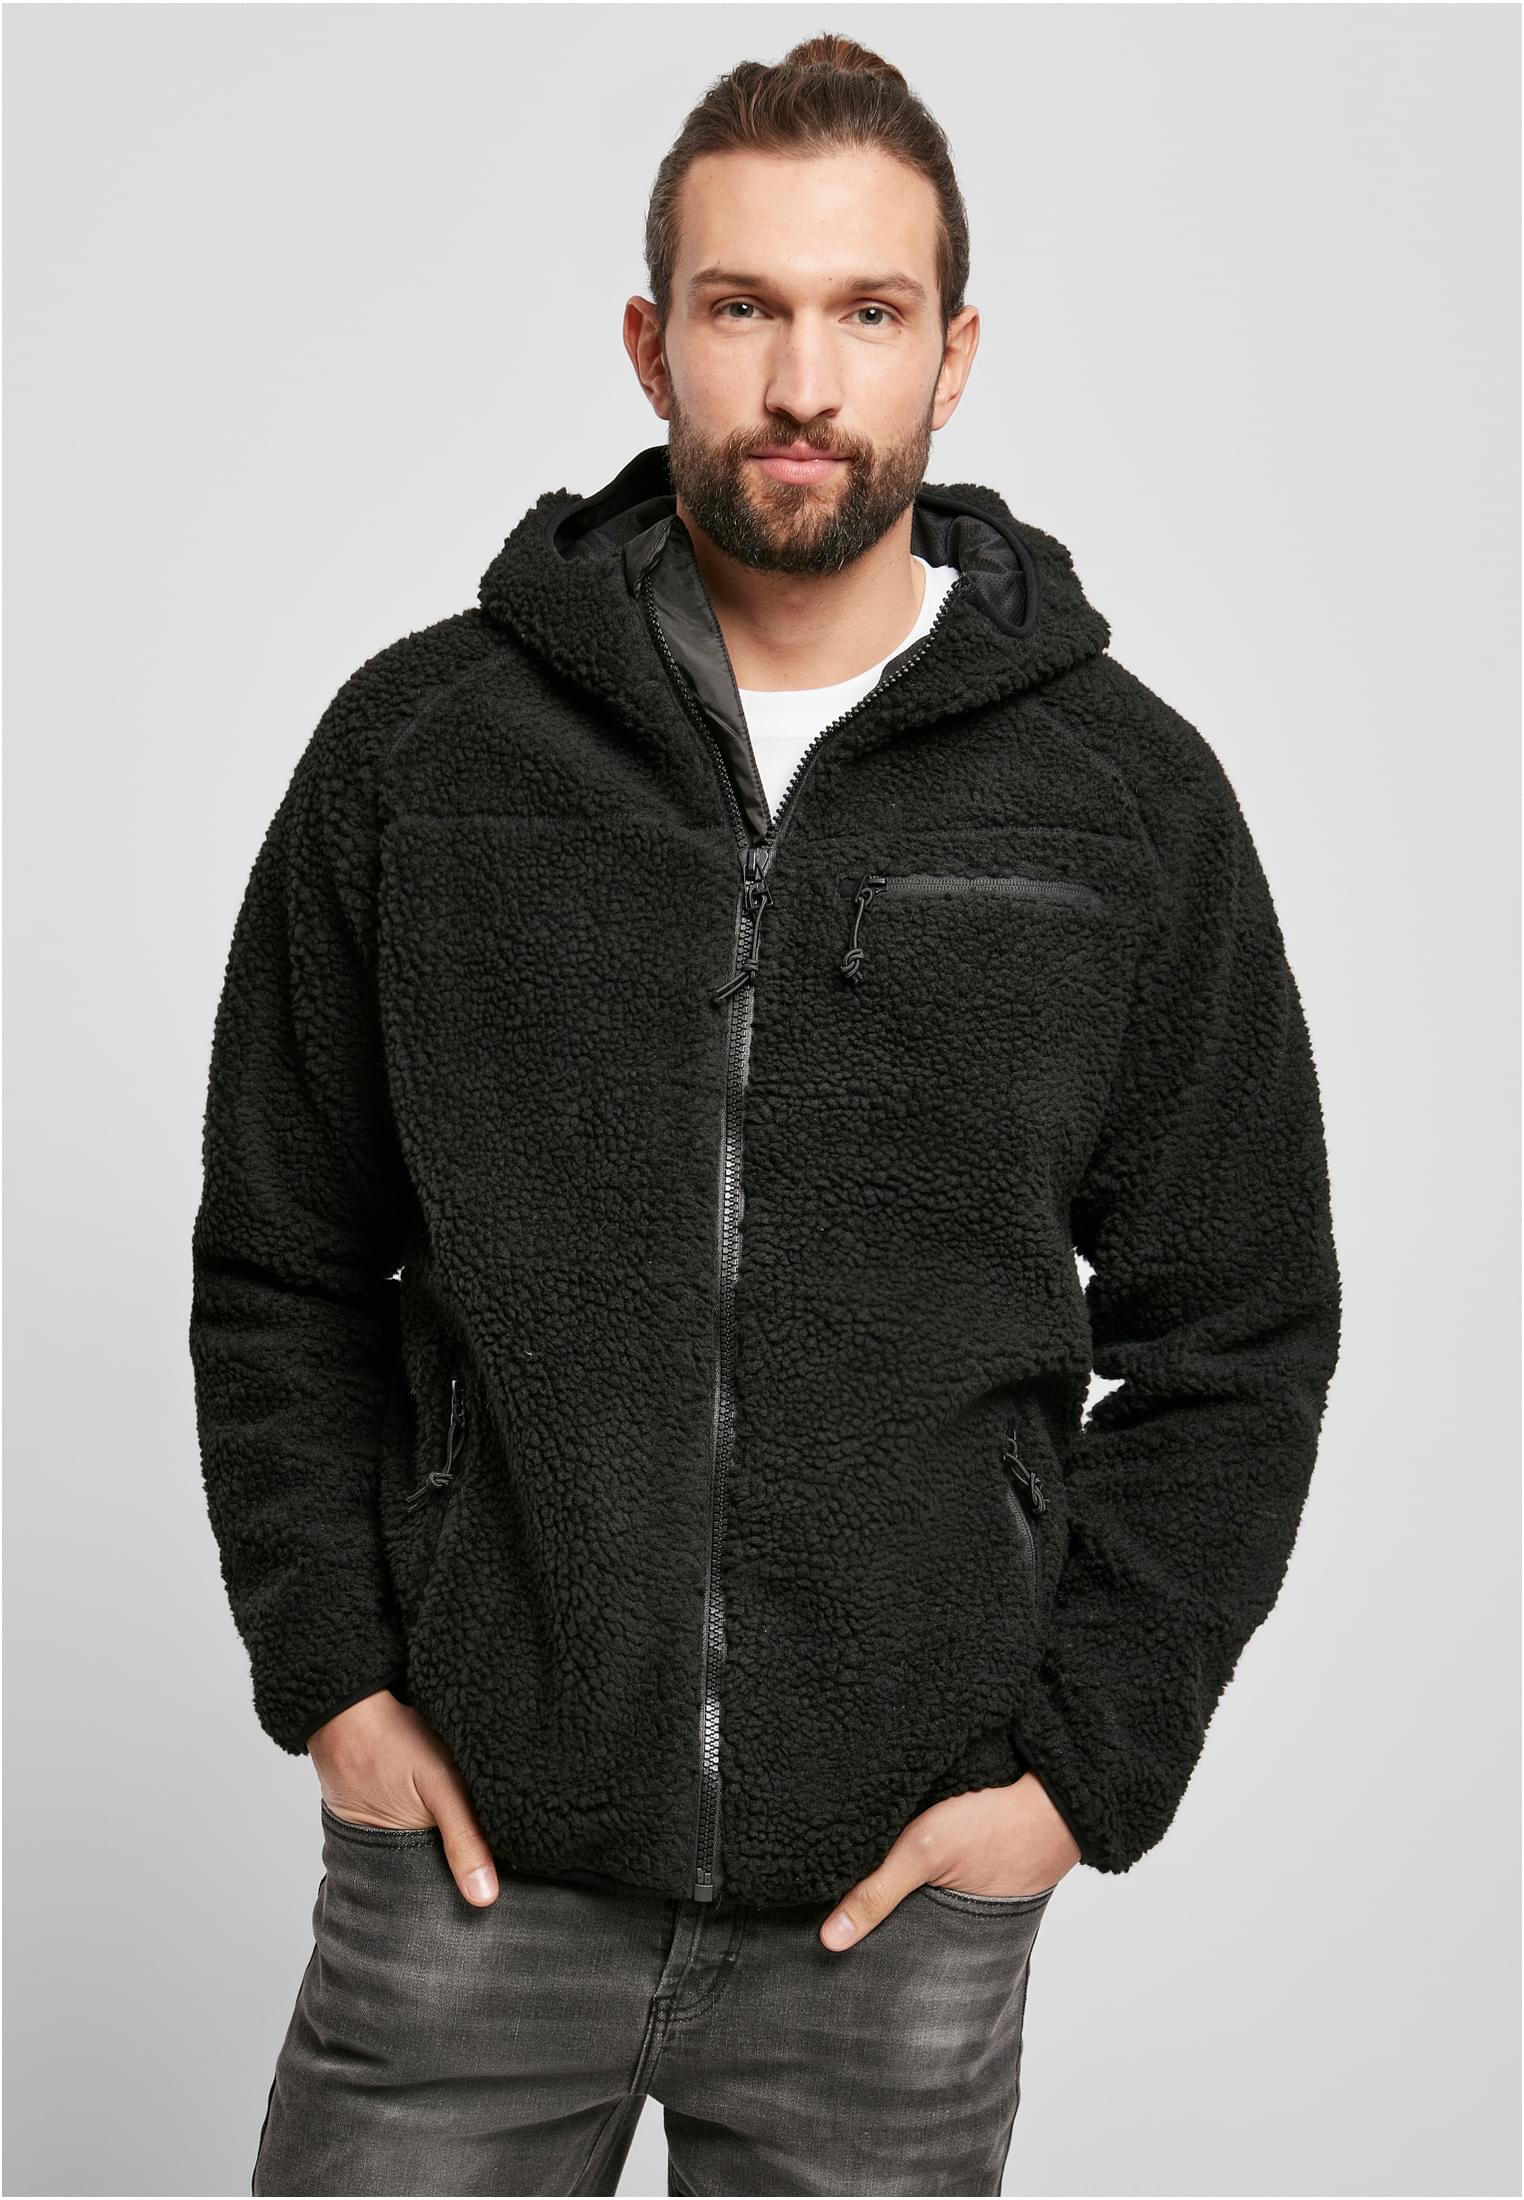 Pullover Teddyfleece Worker Jacket in Farbe anthracite